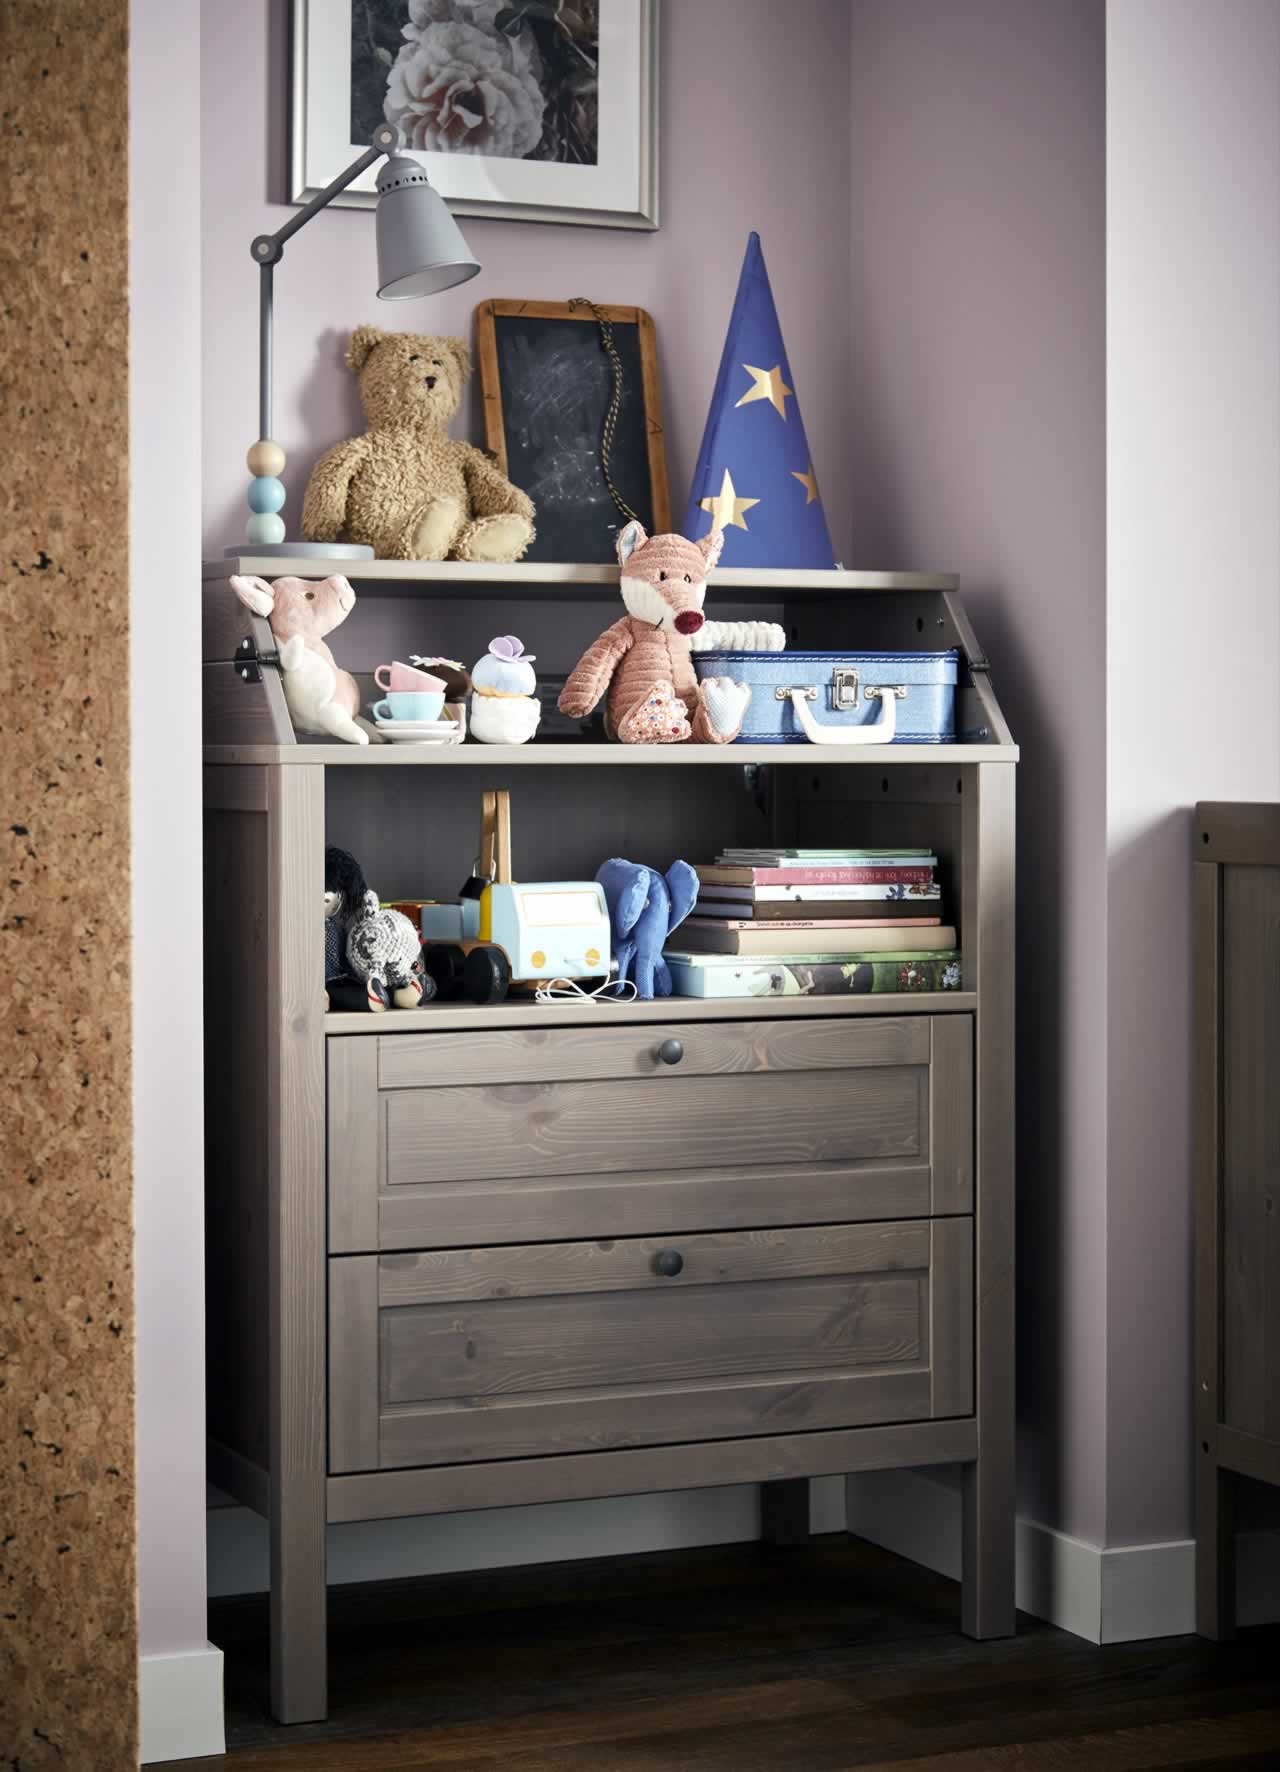 IKEA Ideas - Sharing a bedroom with baby